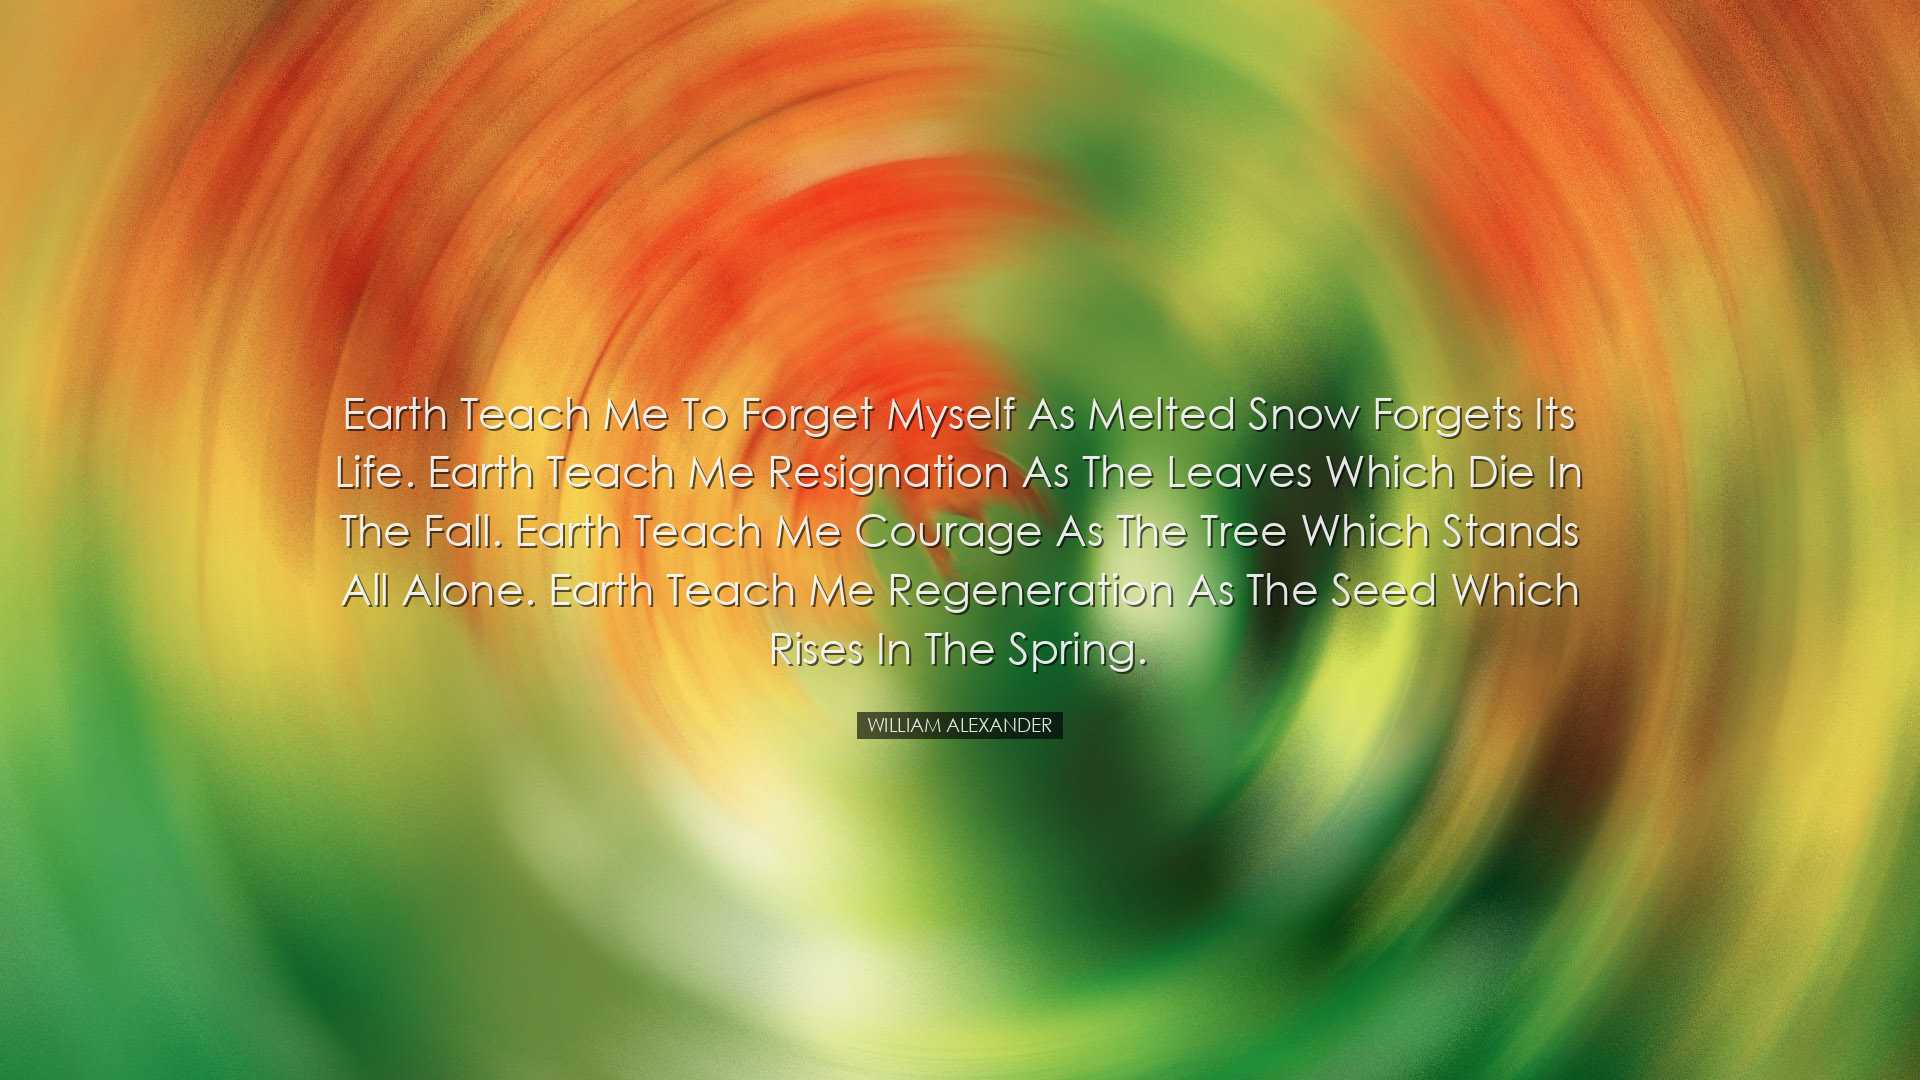 Earth teach me to forget myself as melted snow forgets its life. E